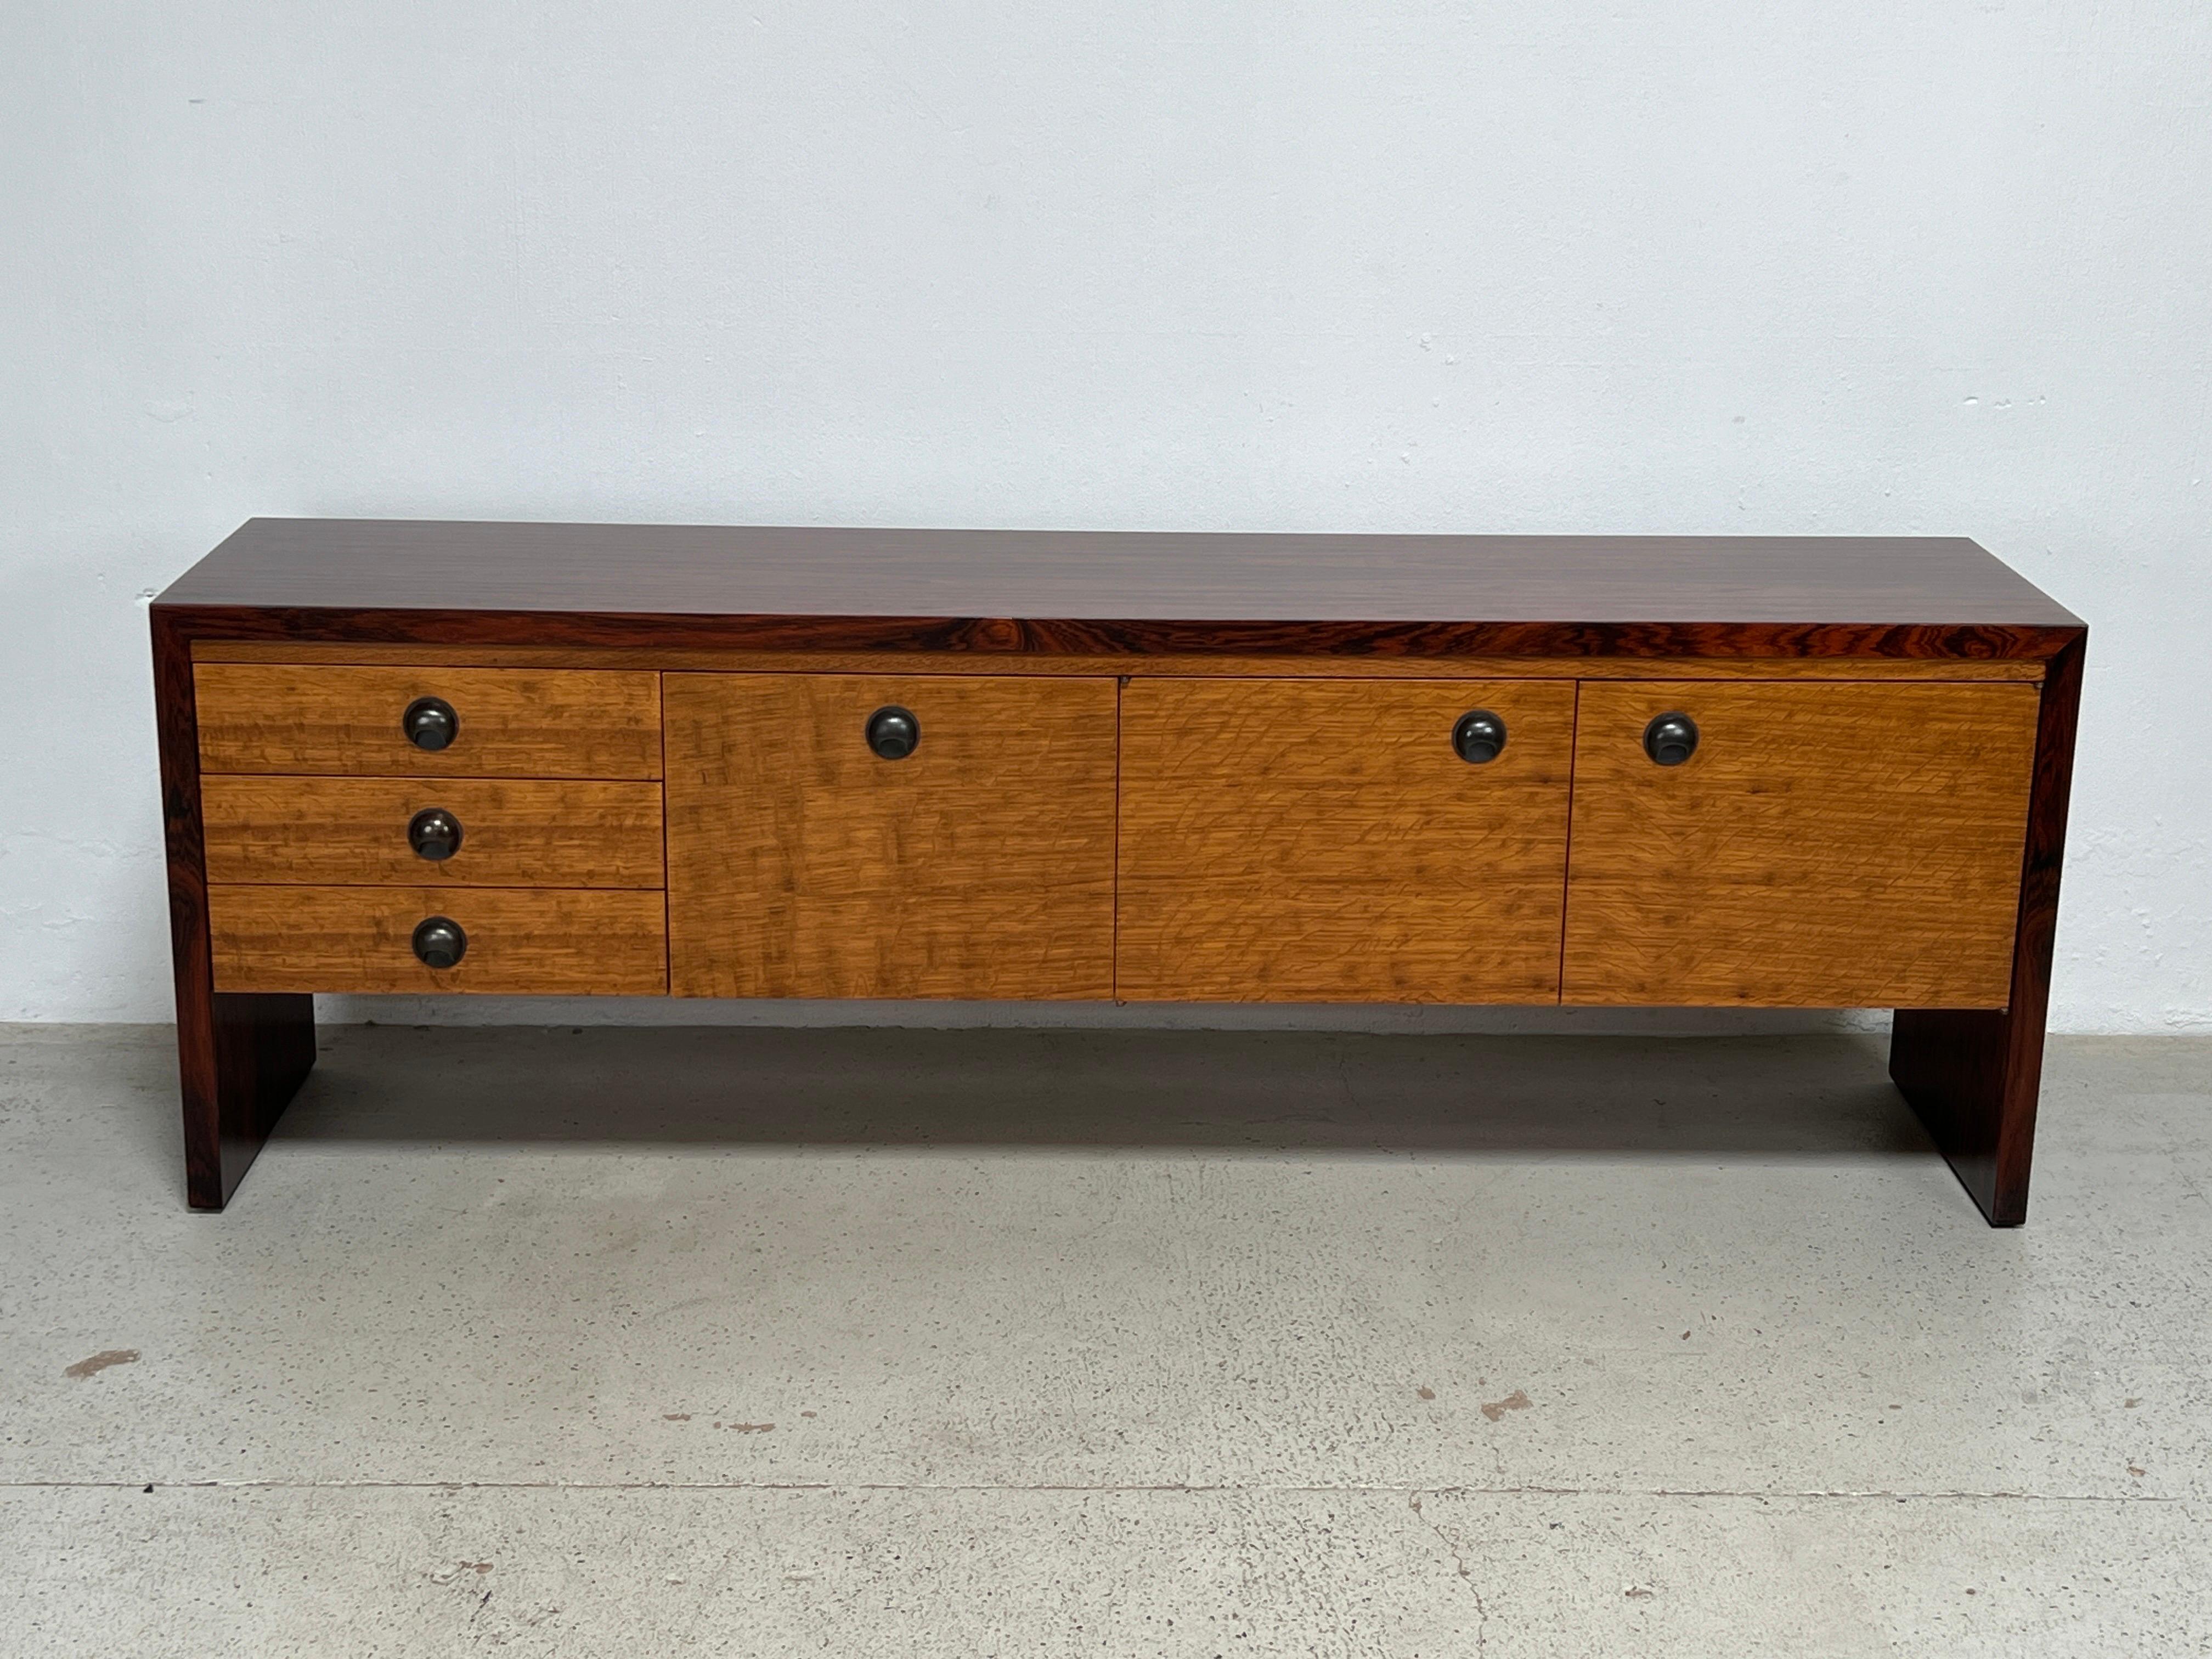 A rosewood and oak credenza with bronze hardware. Designed by Edward Wormley for Dunbar. Matching desk available separately. 